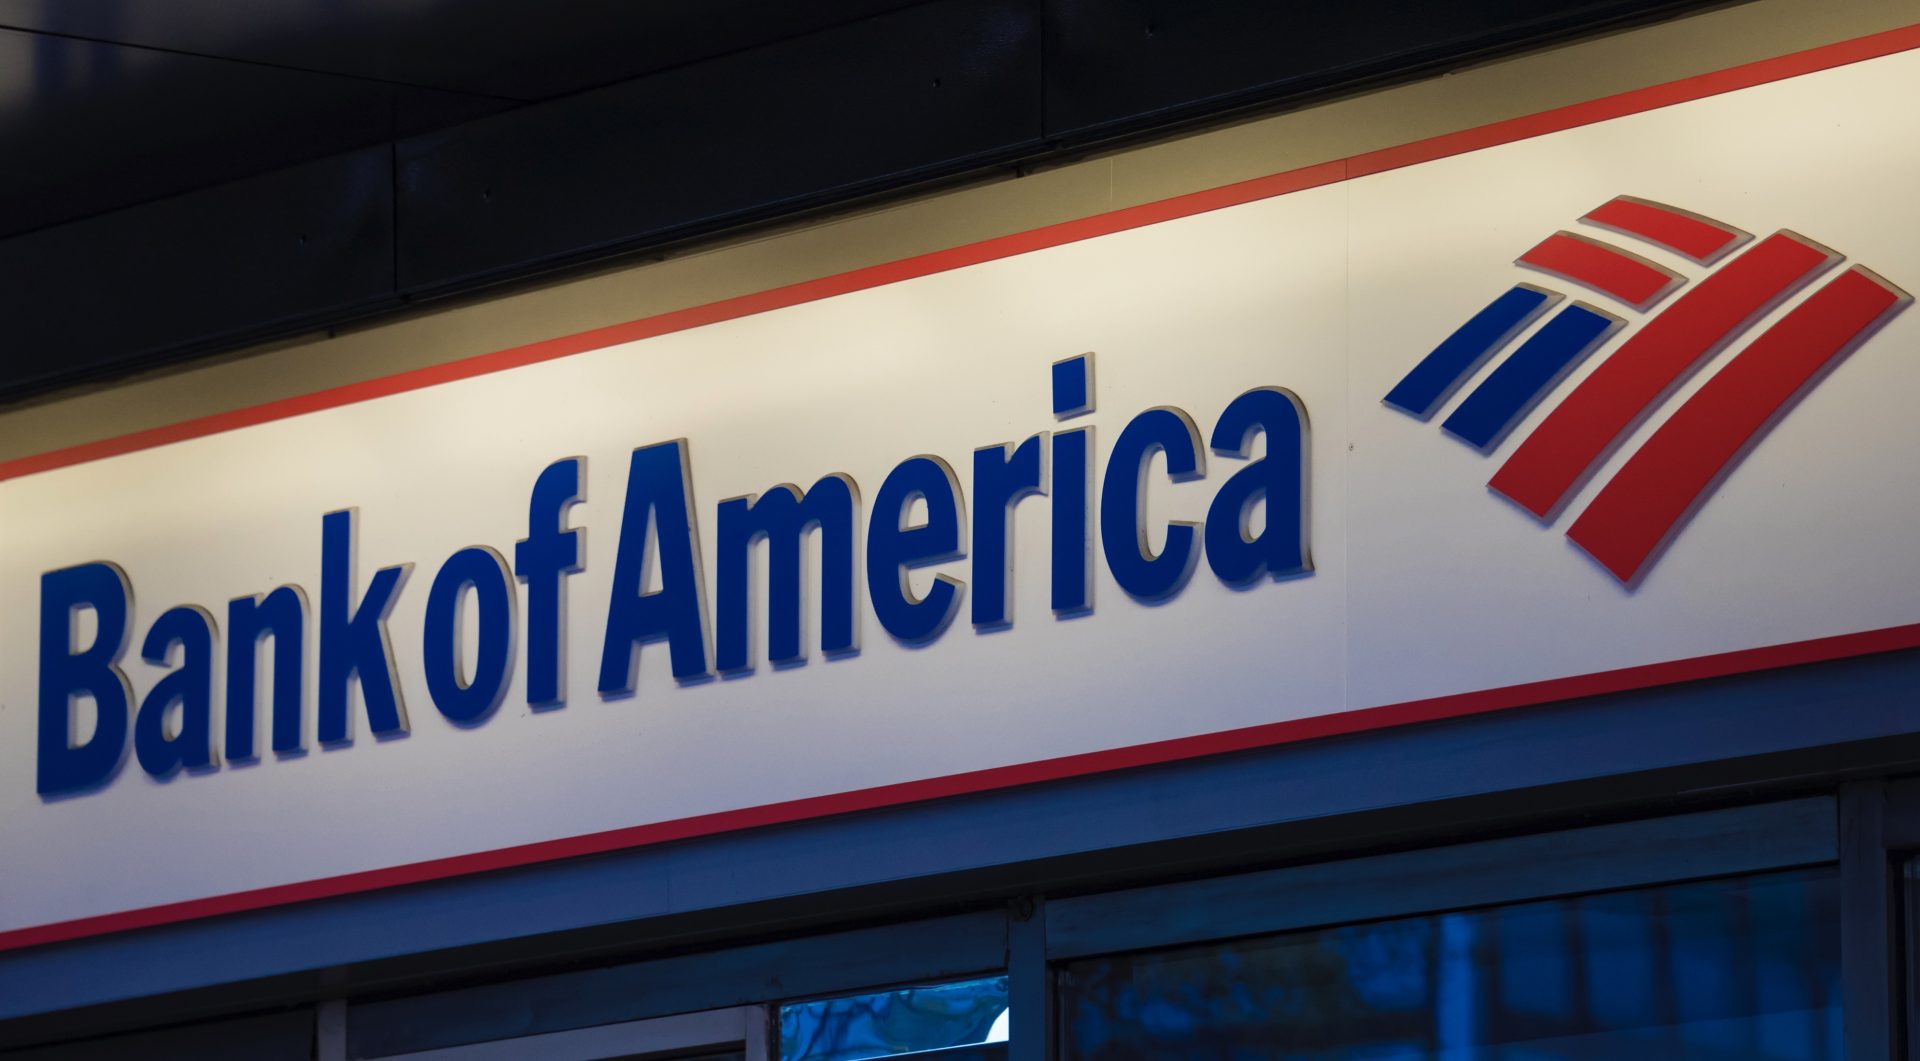 Oop! Bank Of America Ordered To Pay $250M For ‘Double-Dipping’ & ‘Illegally’ Making Fake Accounts